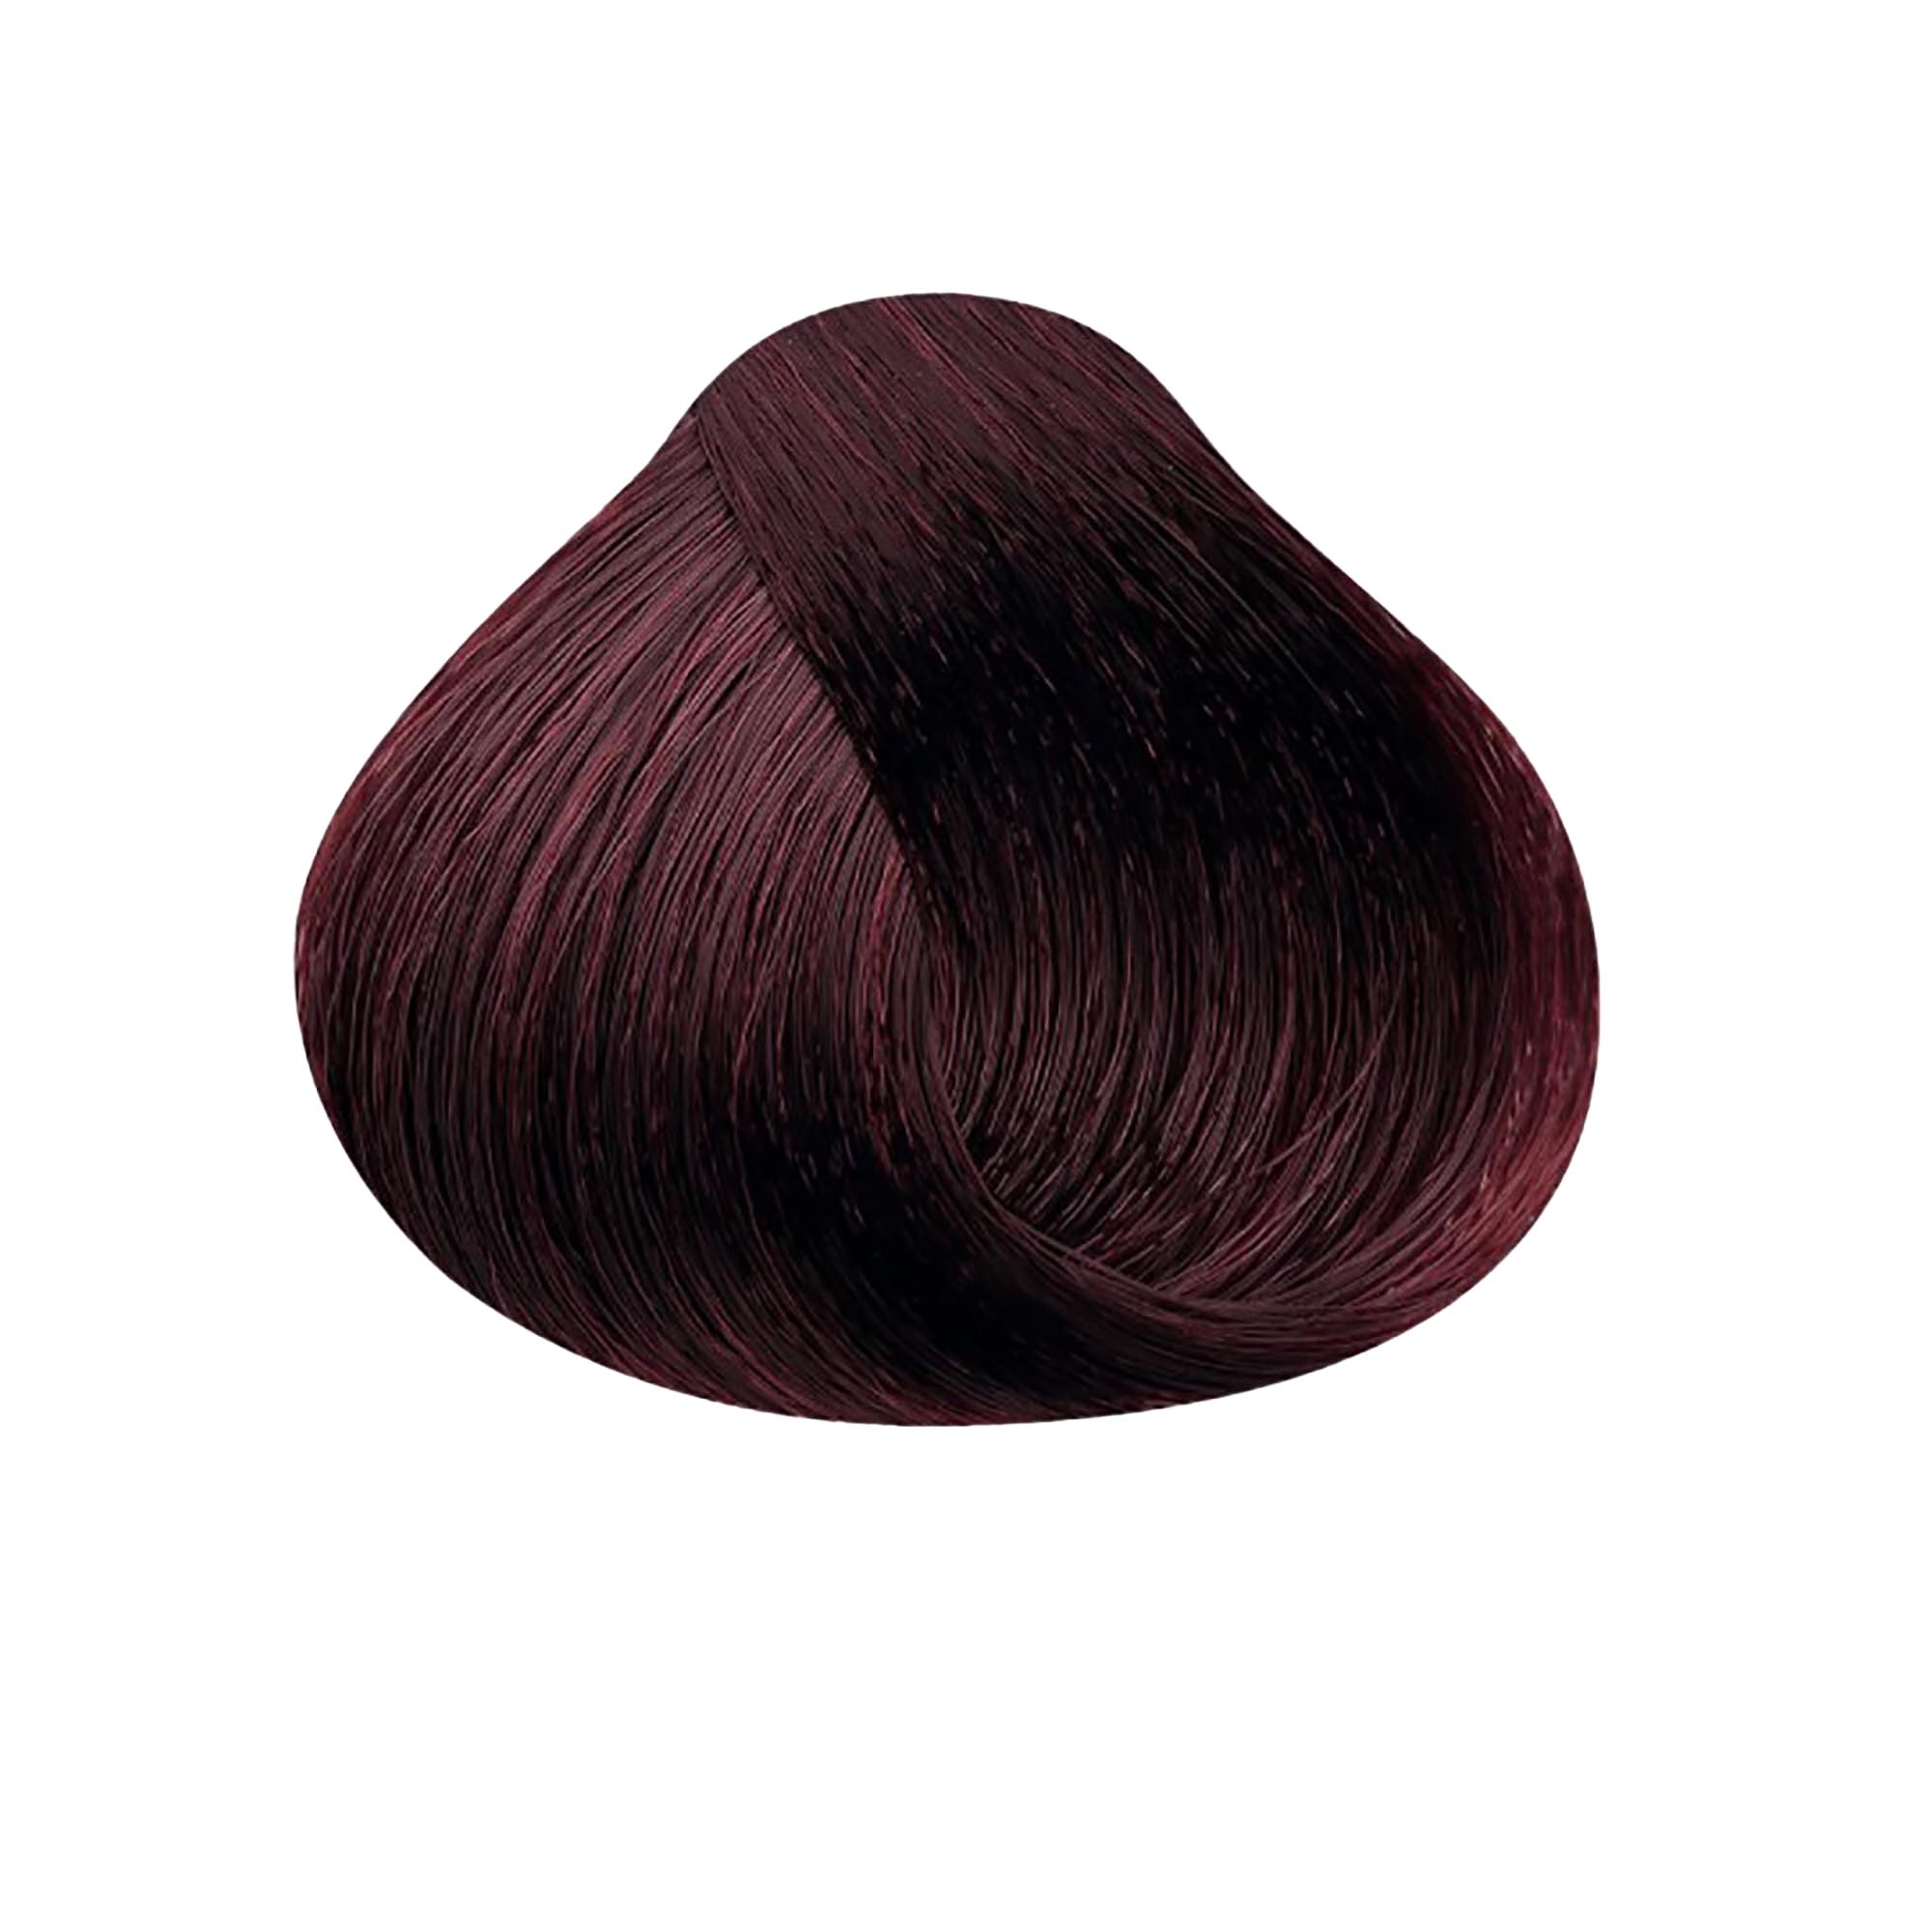 Satin Professional Hair Color / 4MR Red Mahogany Chestnut / Swatch